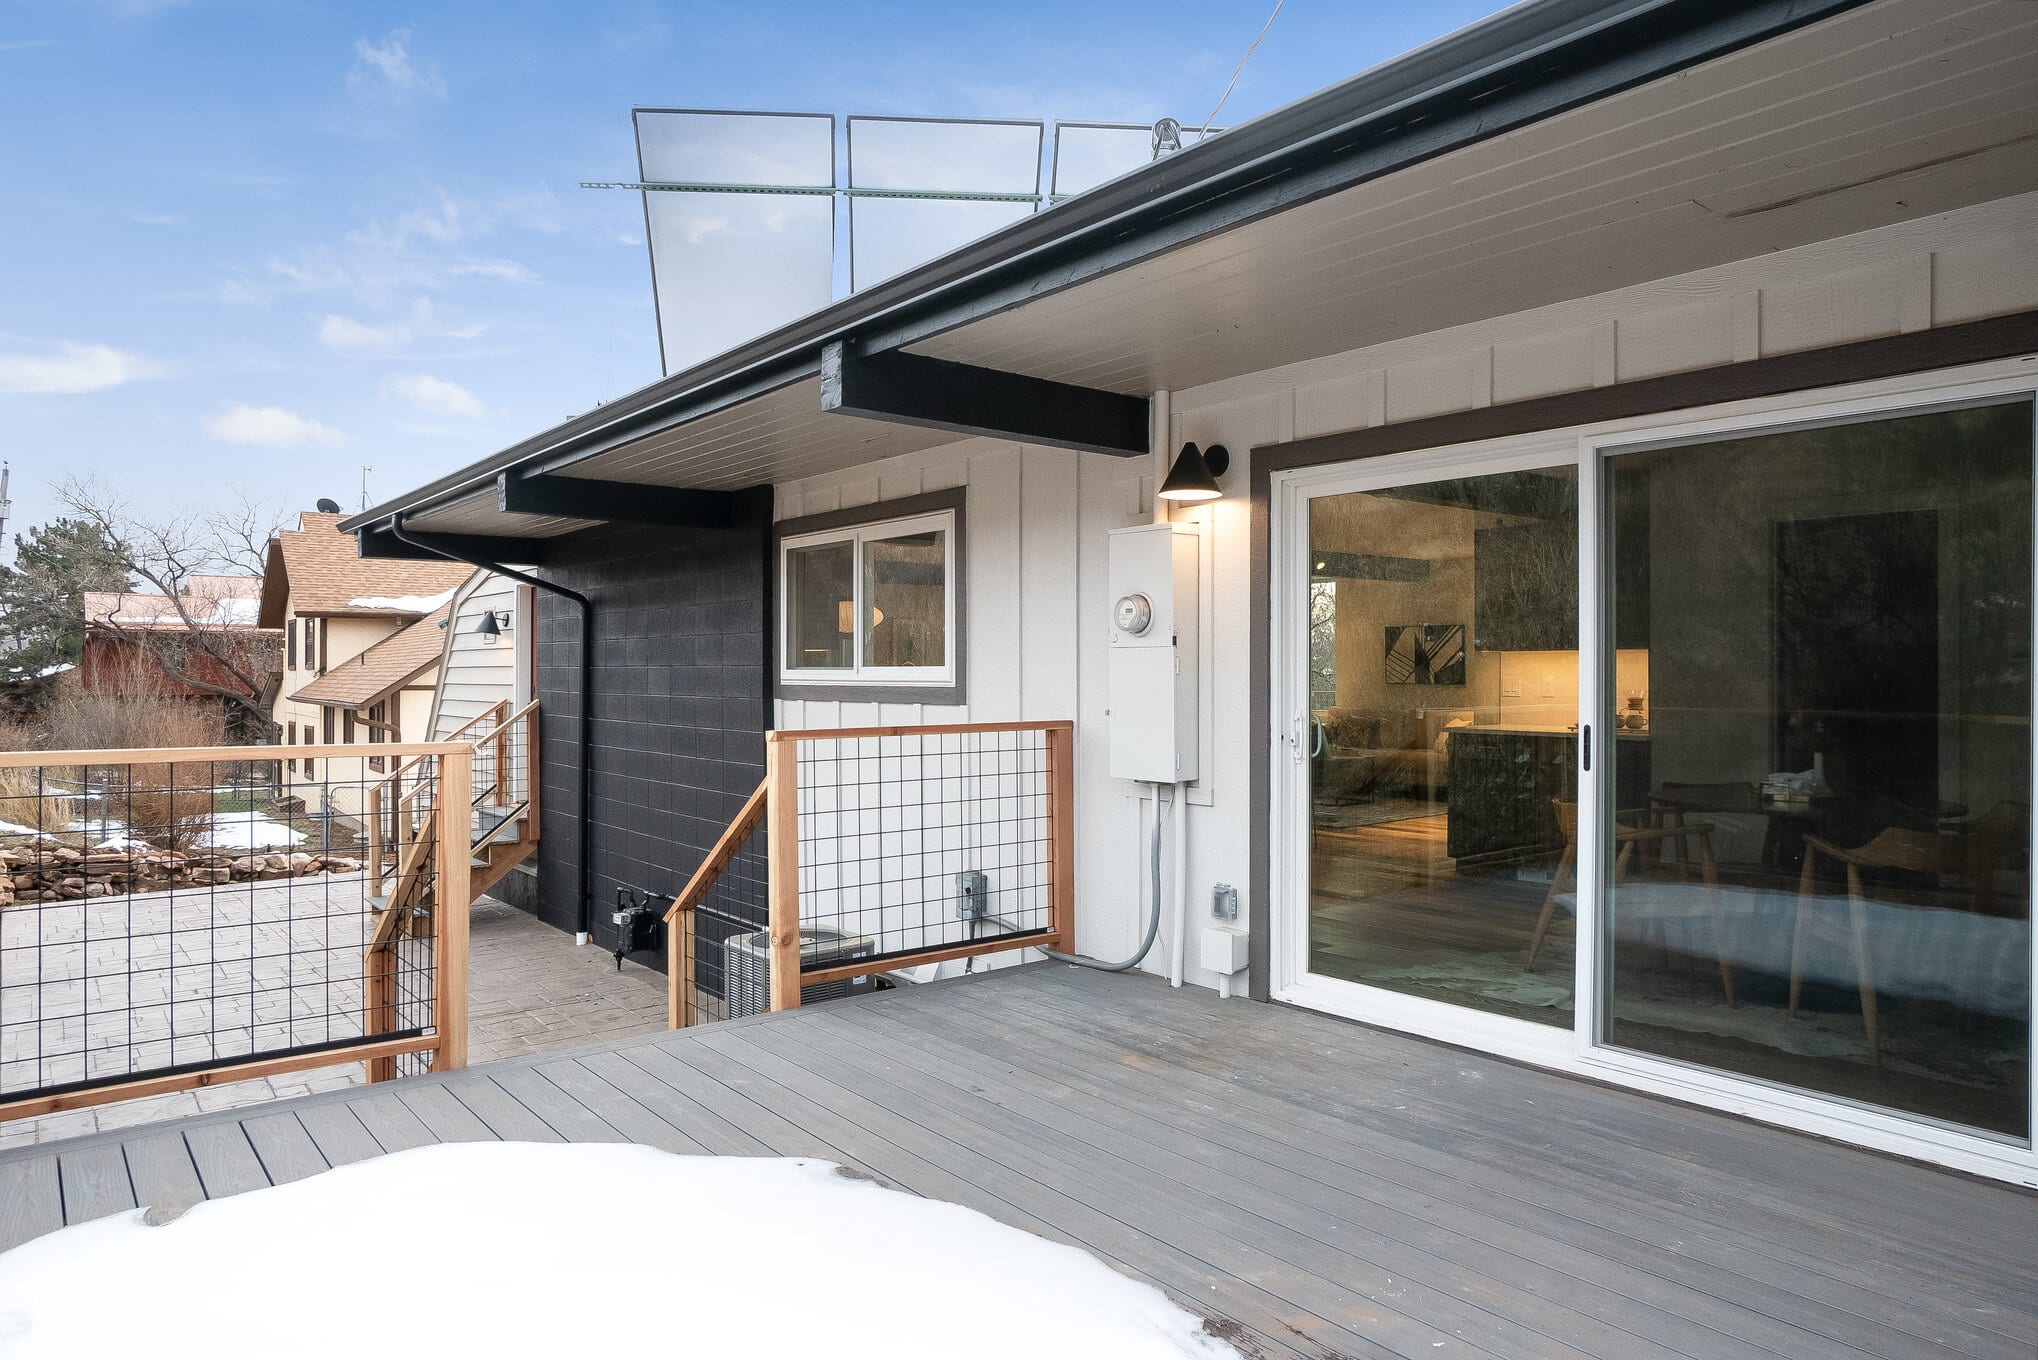 View from the back deck of a modern home with wood and metal railings